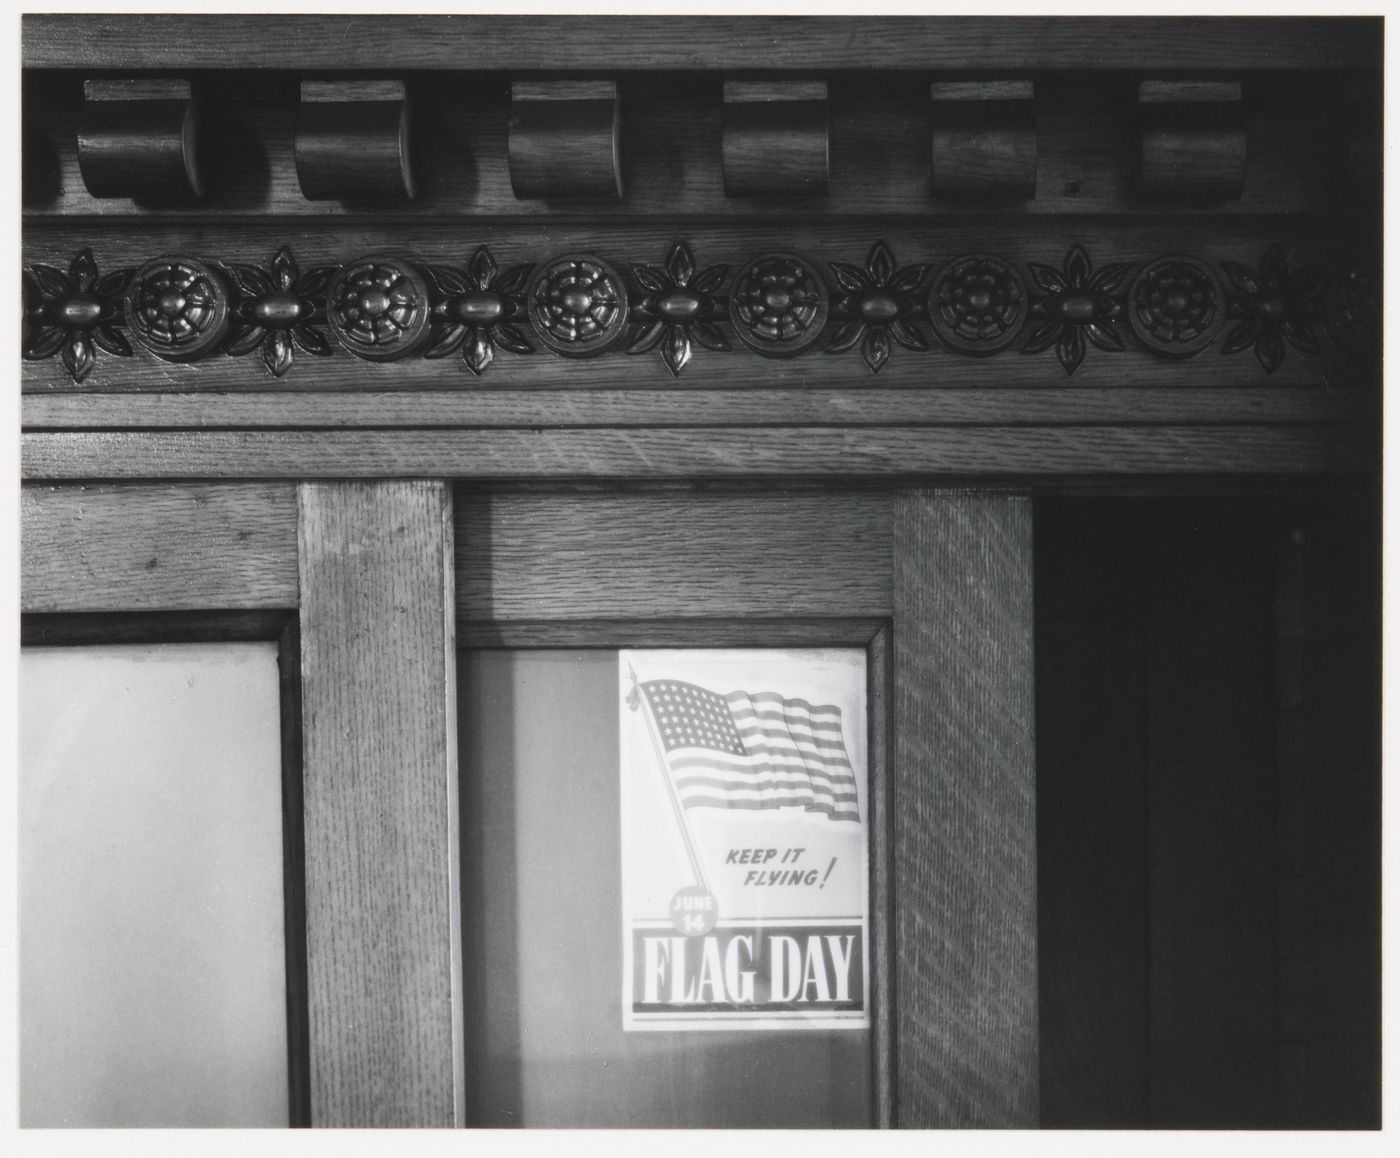 Detail view of cabinet, attic, Old City Hall, Boston, Massachusetts, United States